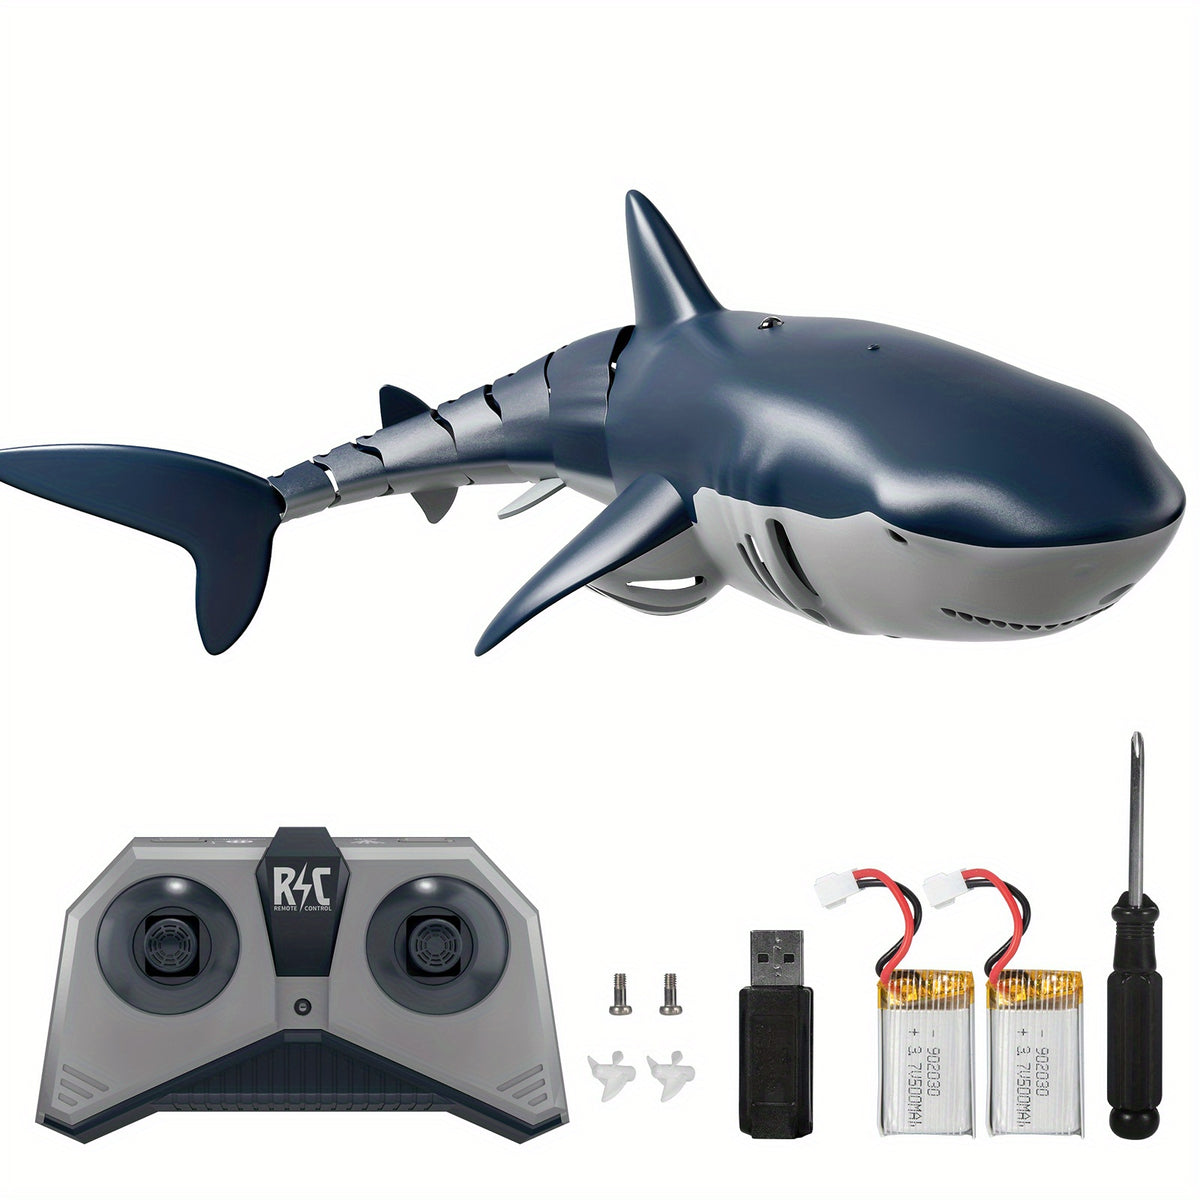 TEMI Remote Control Shark 1:18 High Simulation Scale Fish With Light & Spray Water For Lake Bathroom Pool Toys For Kids Boys Halloween Christmas Birthday Gift RC Boat